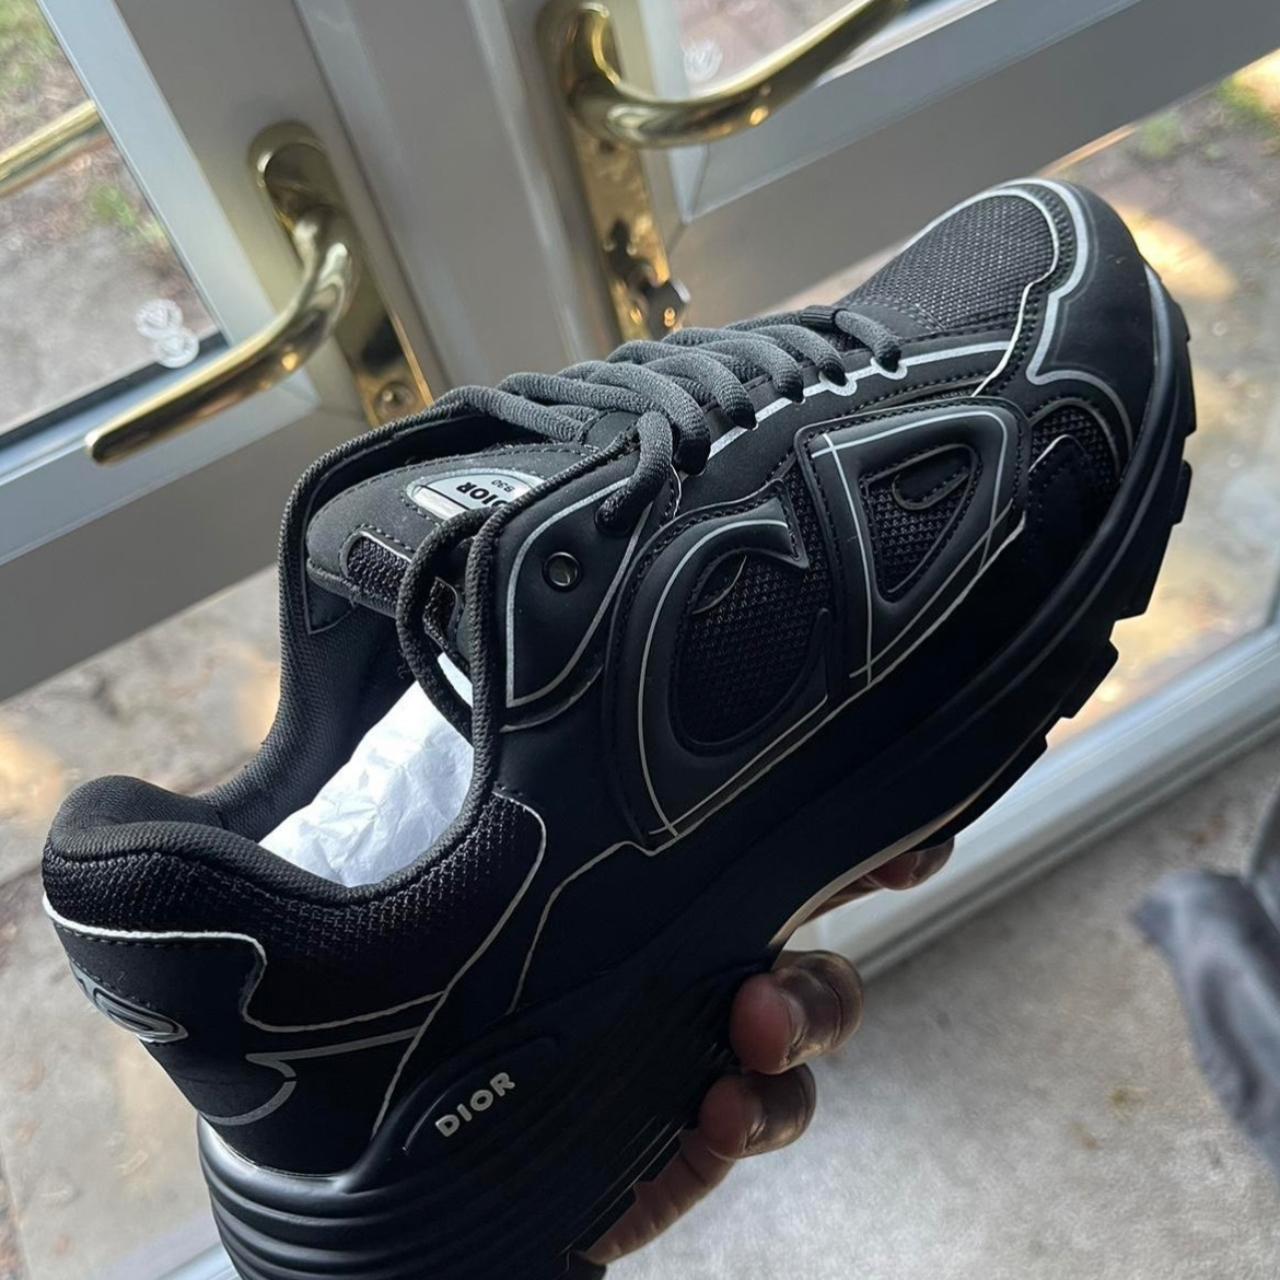 Dior B30 Triple Black Uk Size 8 Comes with dust bags... - Depop